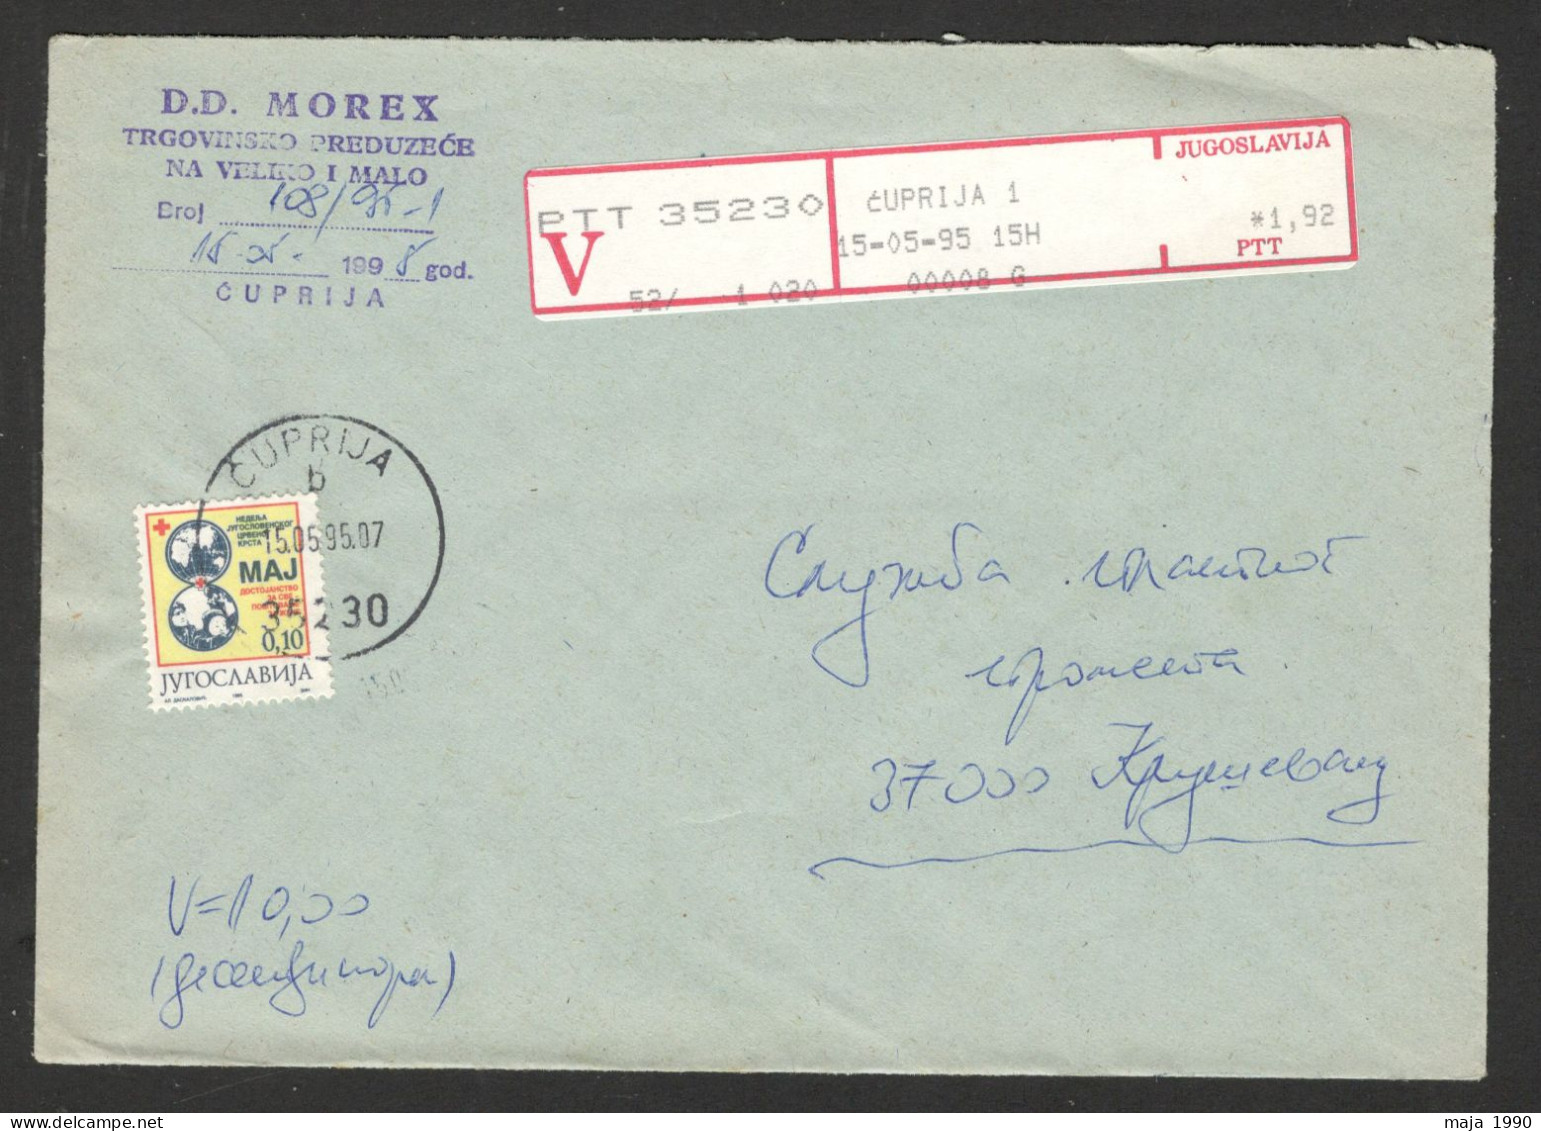 YUGOSLAVIA SERBIA - VALUE OFFICIAL COVER WITH TAX STAMP "RED CROSS" - 1995. - Lettres & Documents